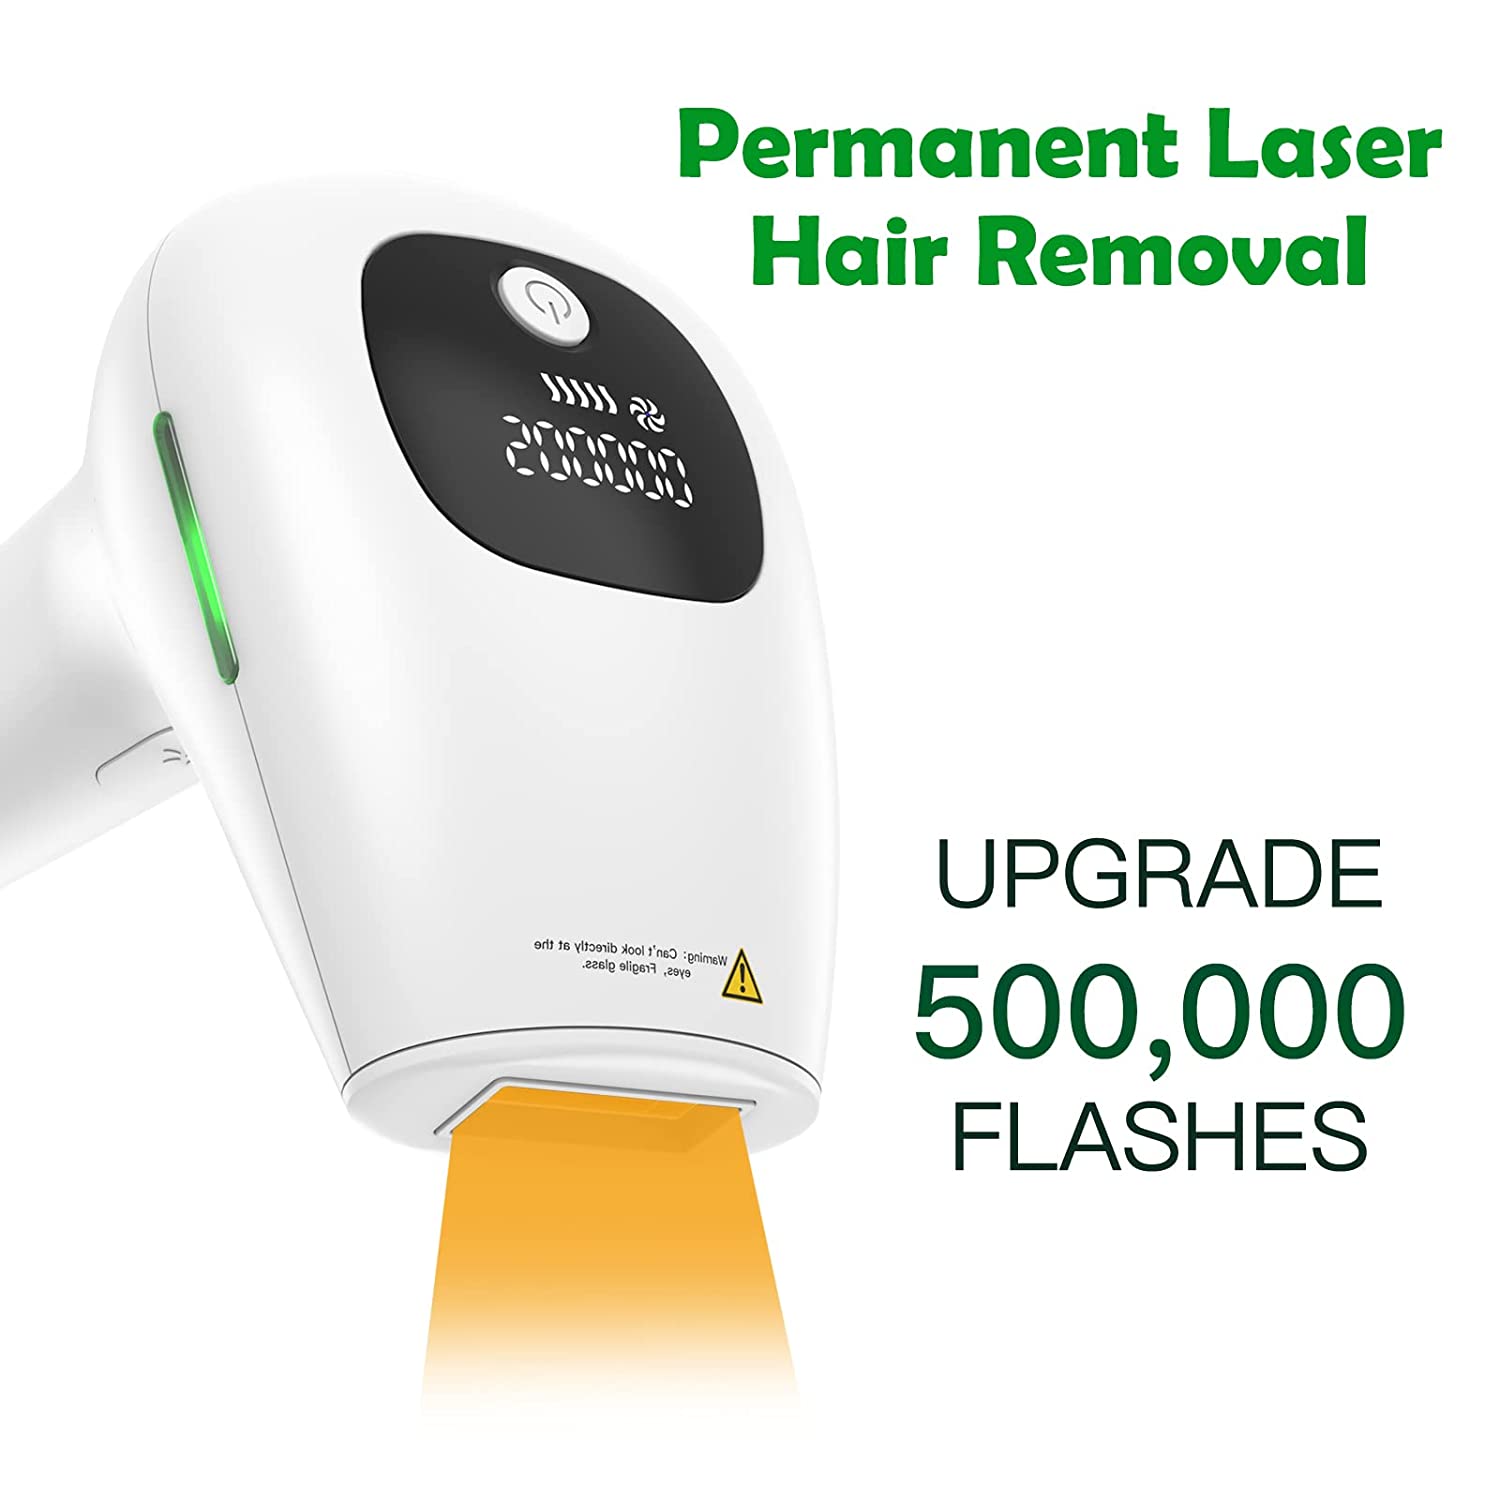 At-Home IPL Hair Removal System